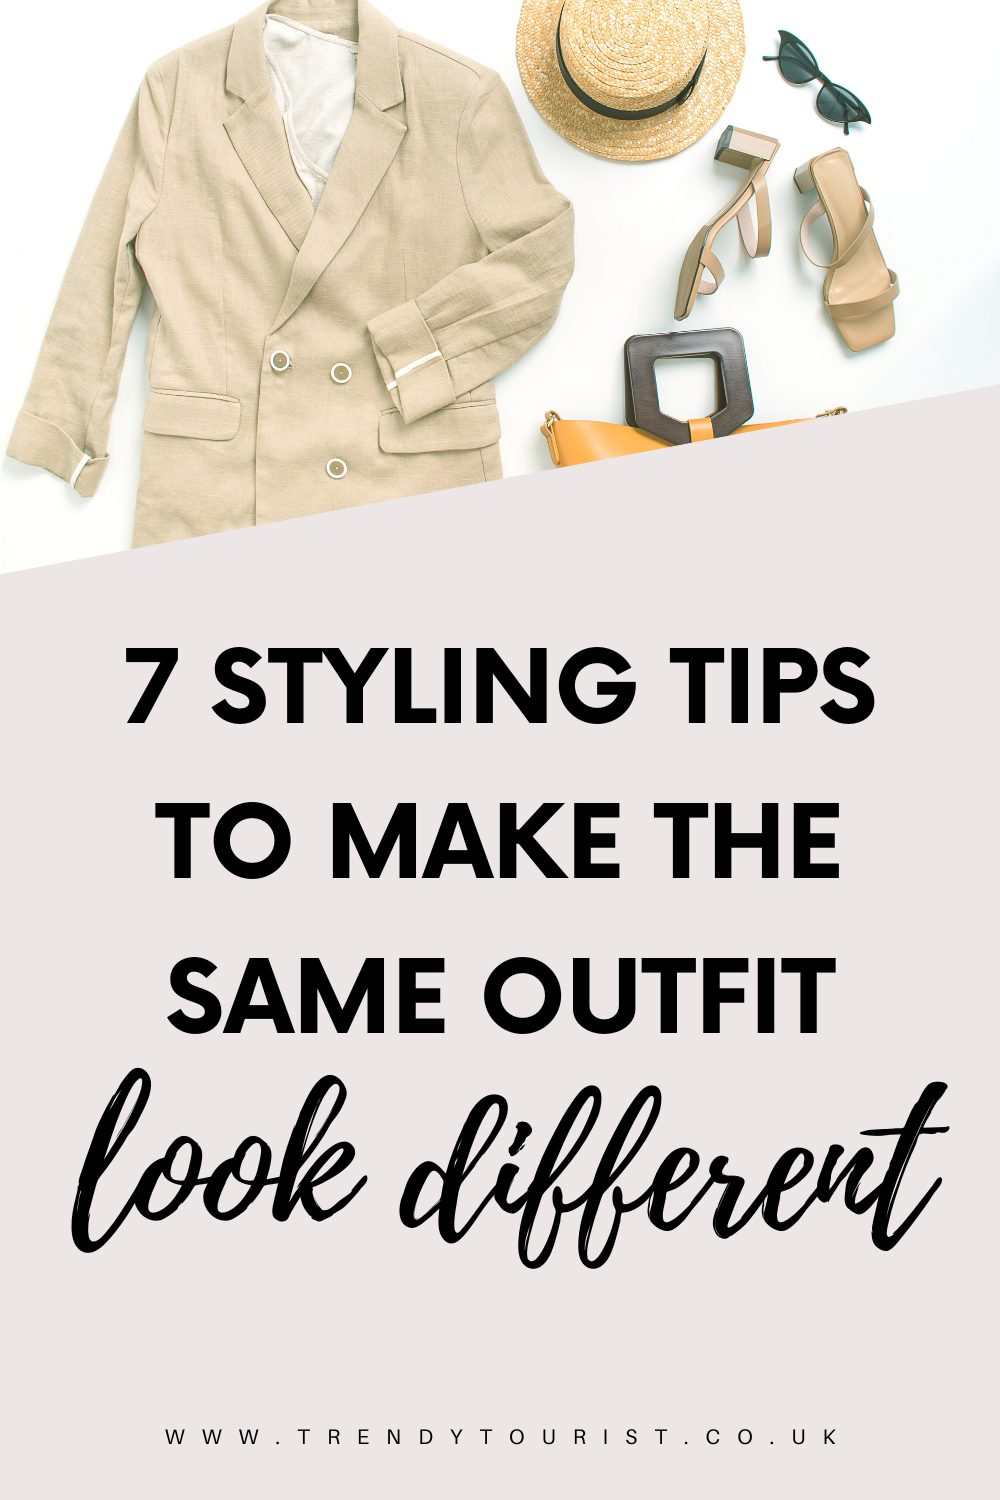 7 Styling Tips to Make the Same Outfit Look Different - Trendy Tourist